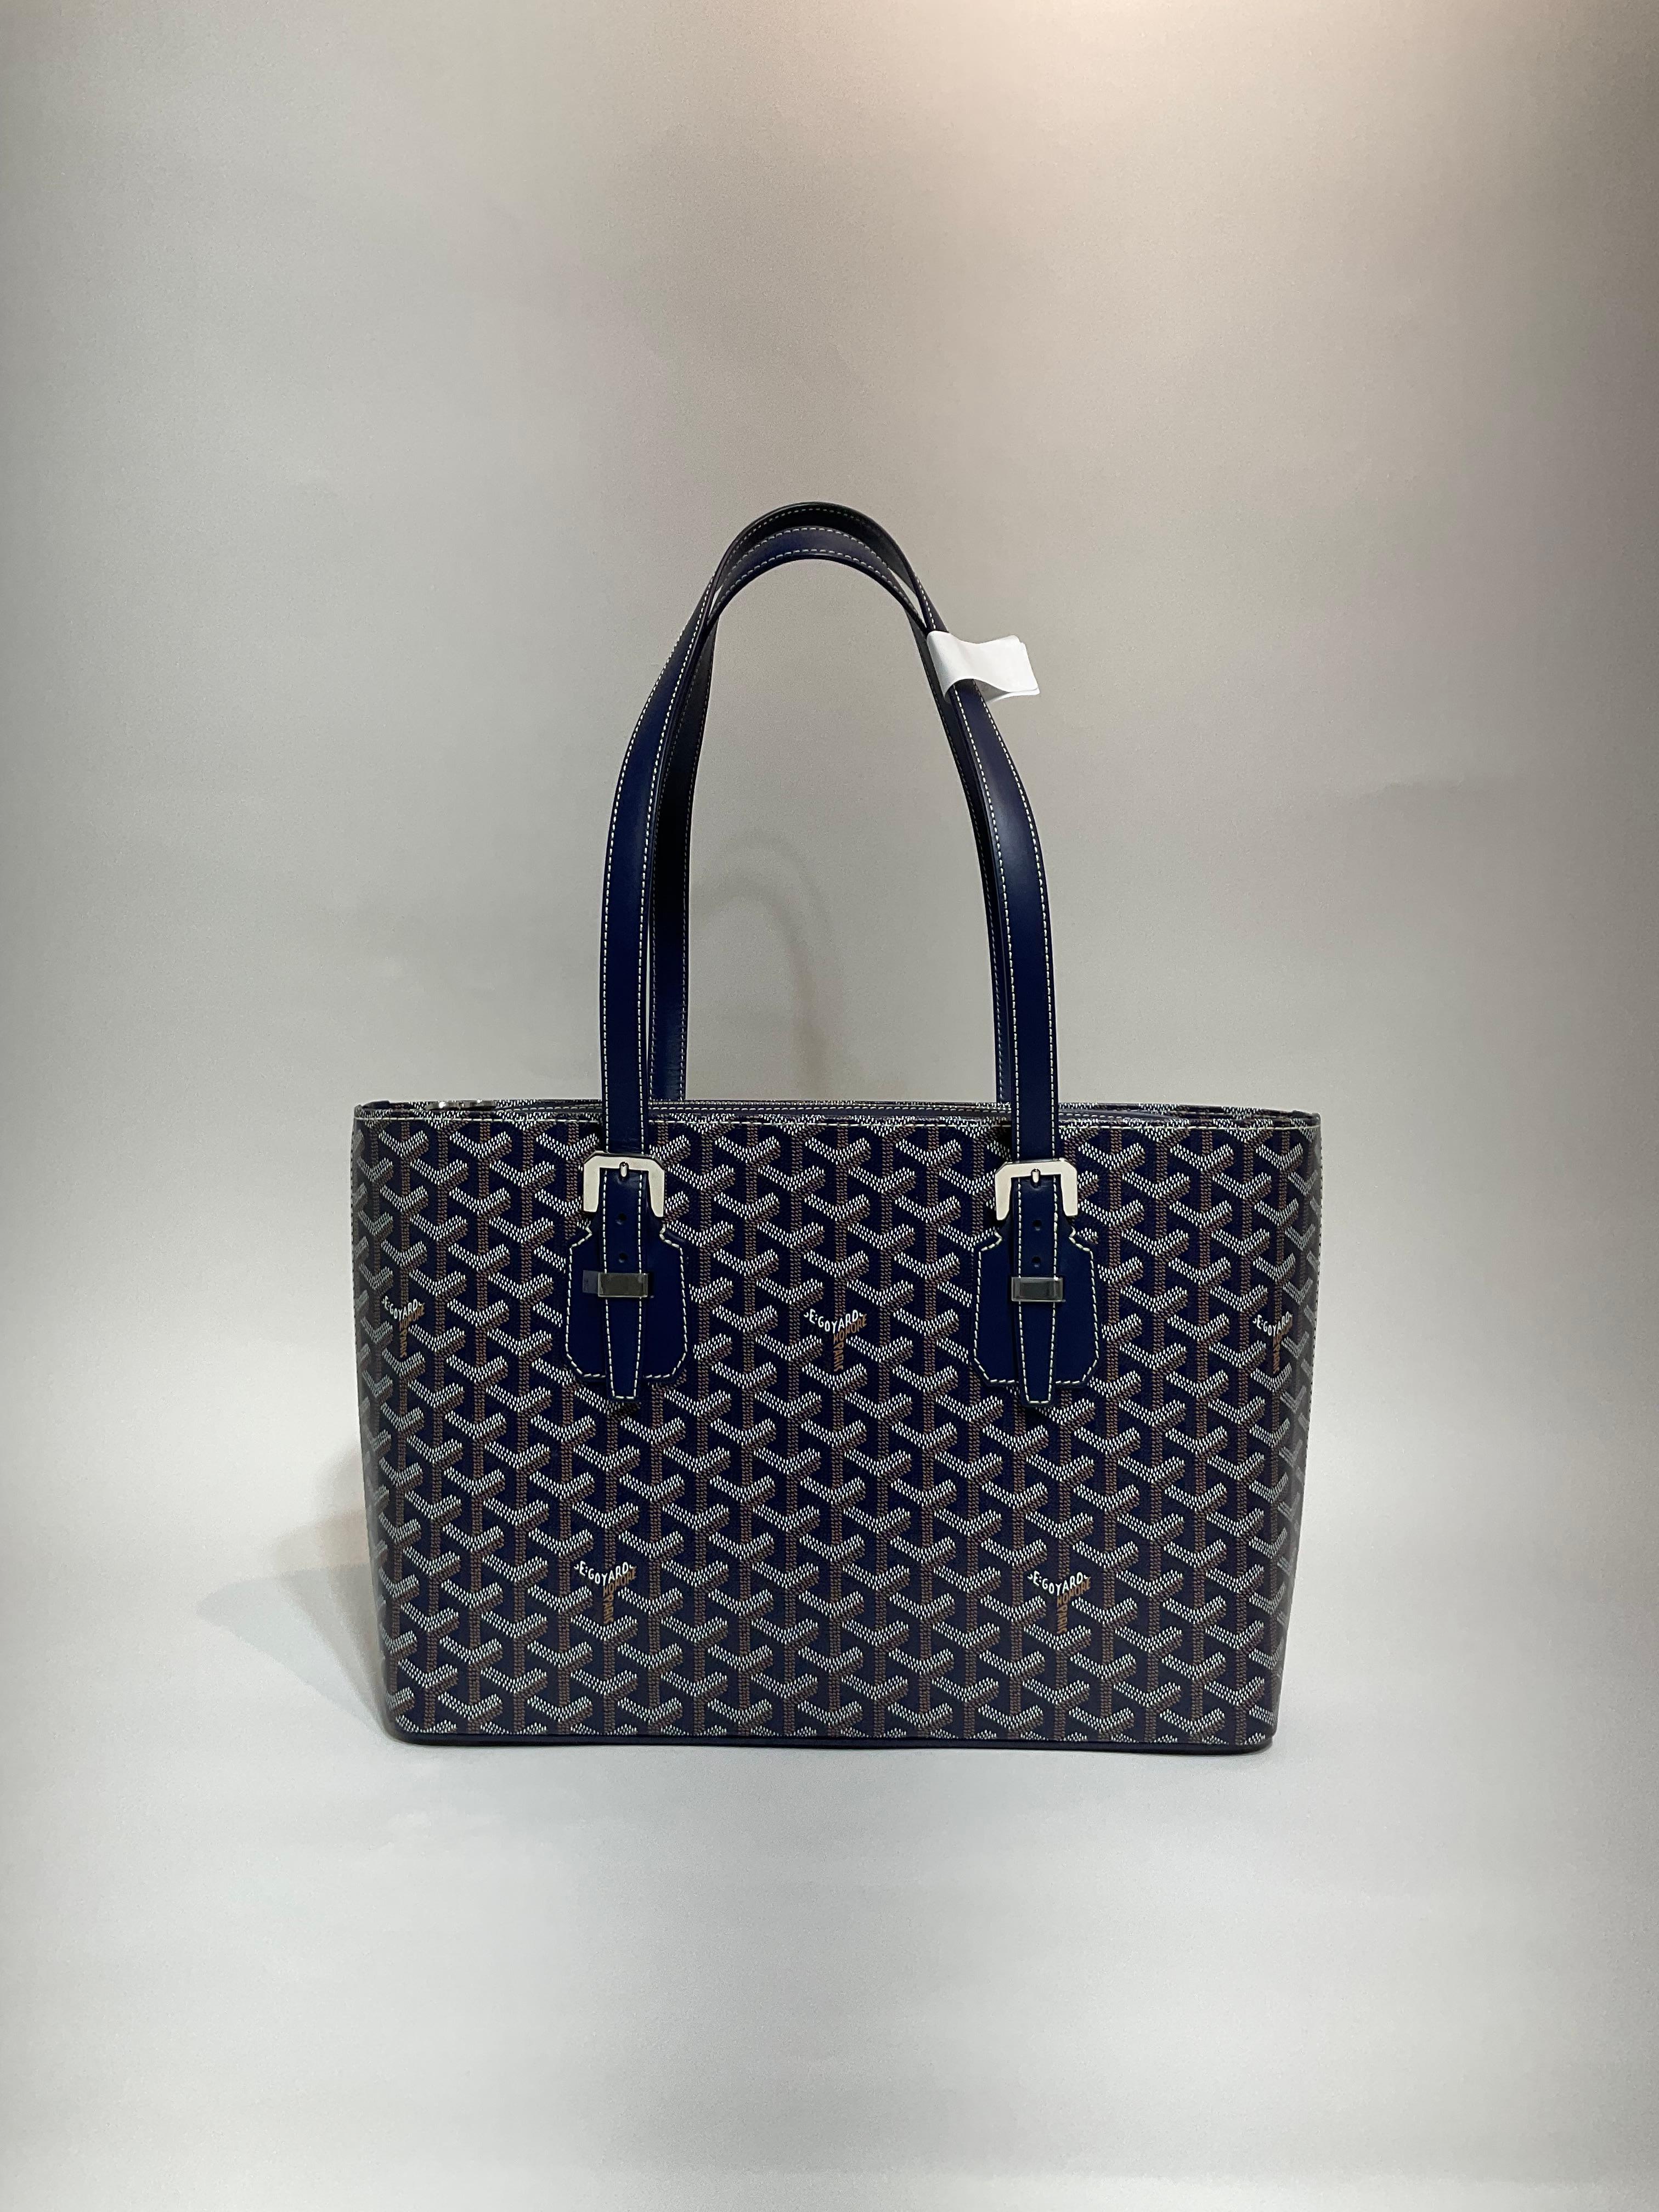 Goyard Navy Okinawa PM Tote In Excellent Condition For Sale In Palm Beach, FL